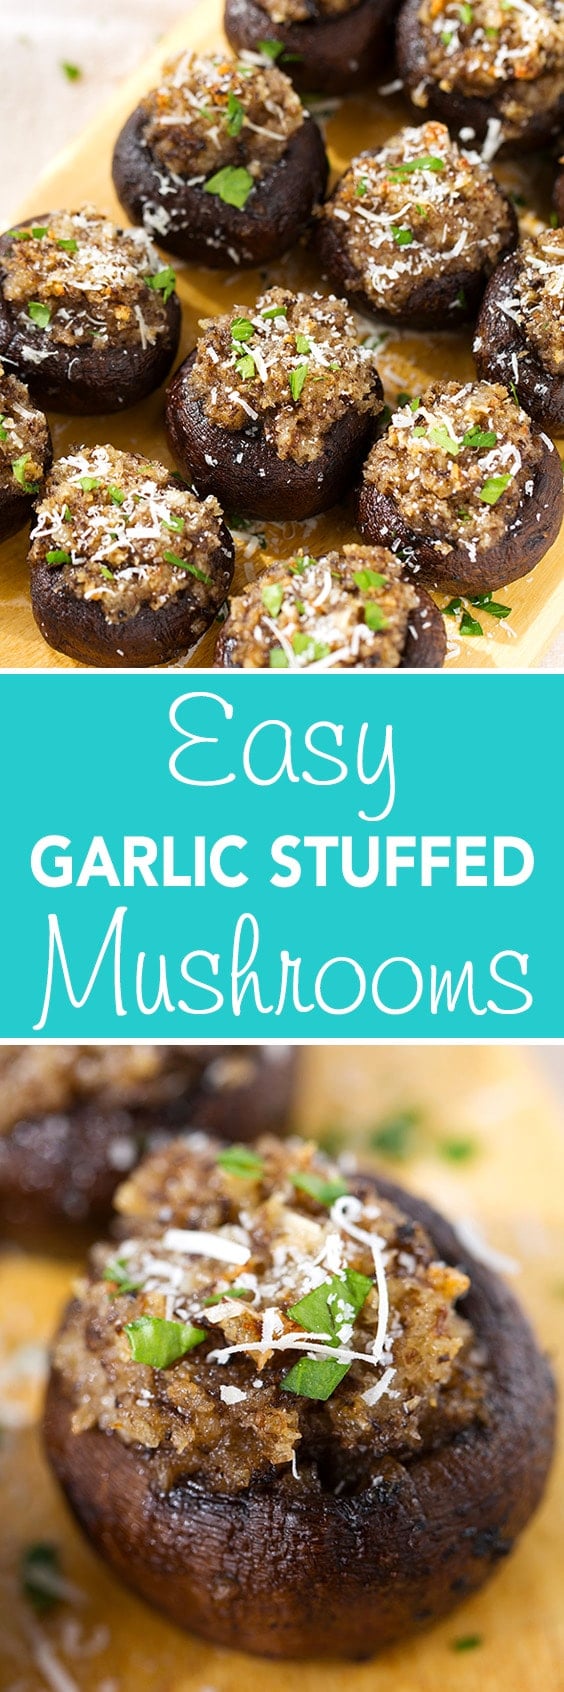 Easy Garlic Stuffed Mushrooms are simple and delicious. Vegetarian and a great party appetizer! simplyhappyfoodie.com